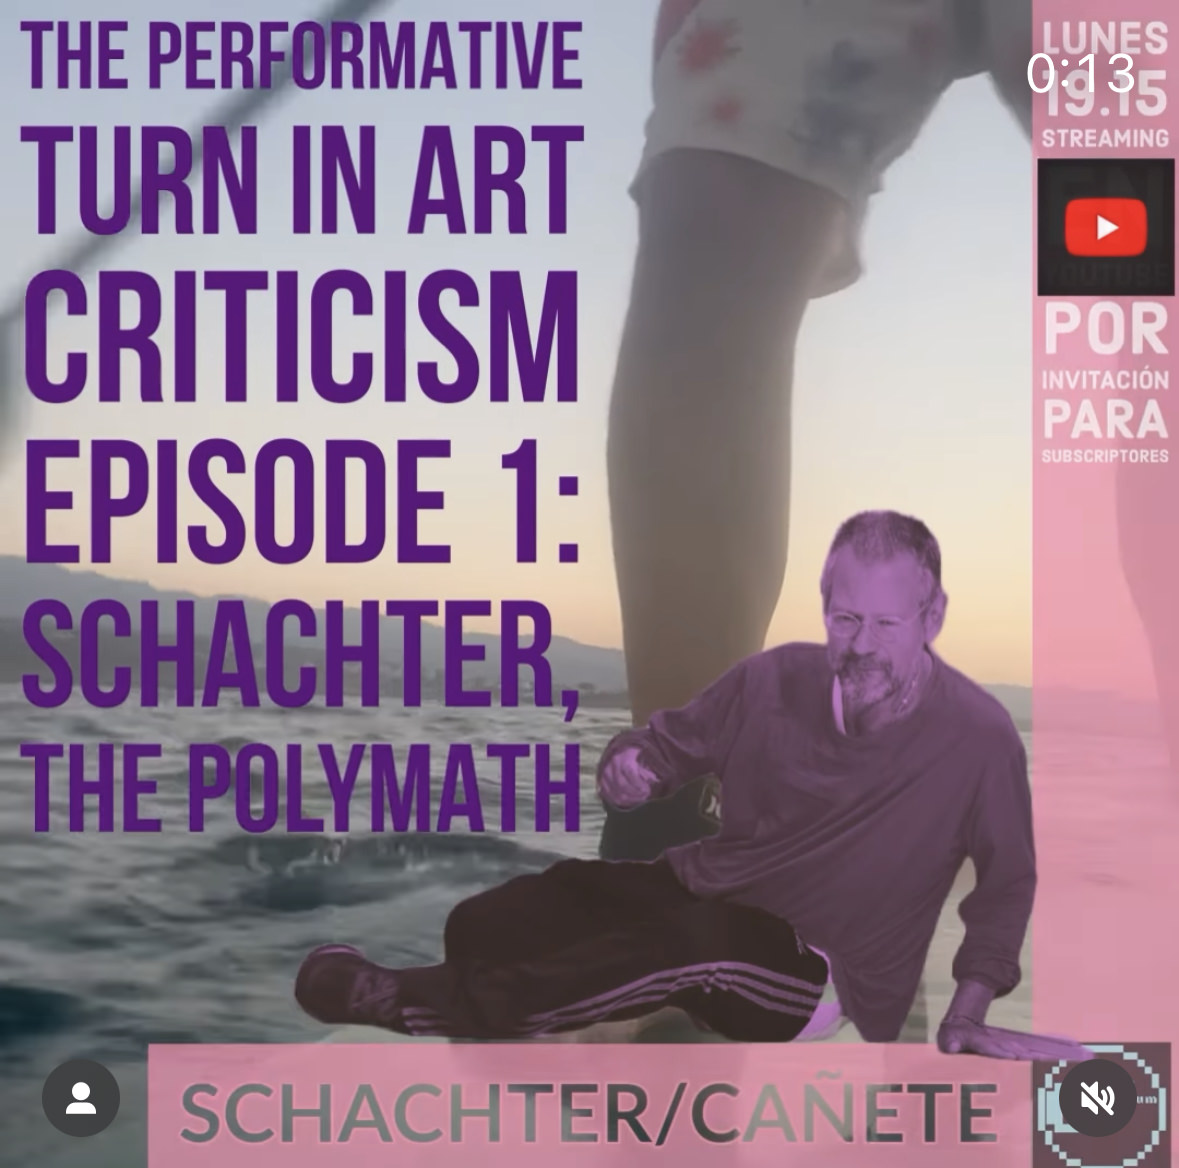 The Performative Turn in Art Criticism Episode 1: Schachter, The Polymath